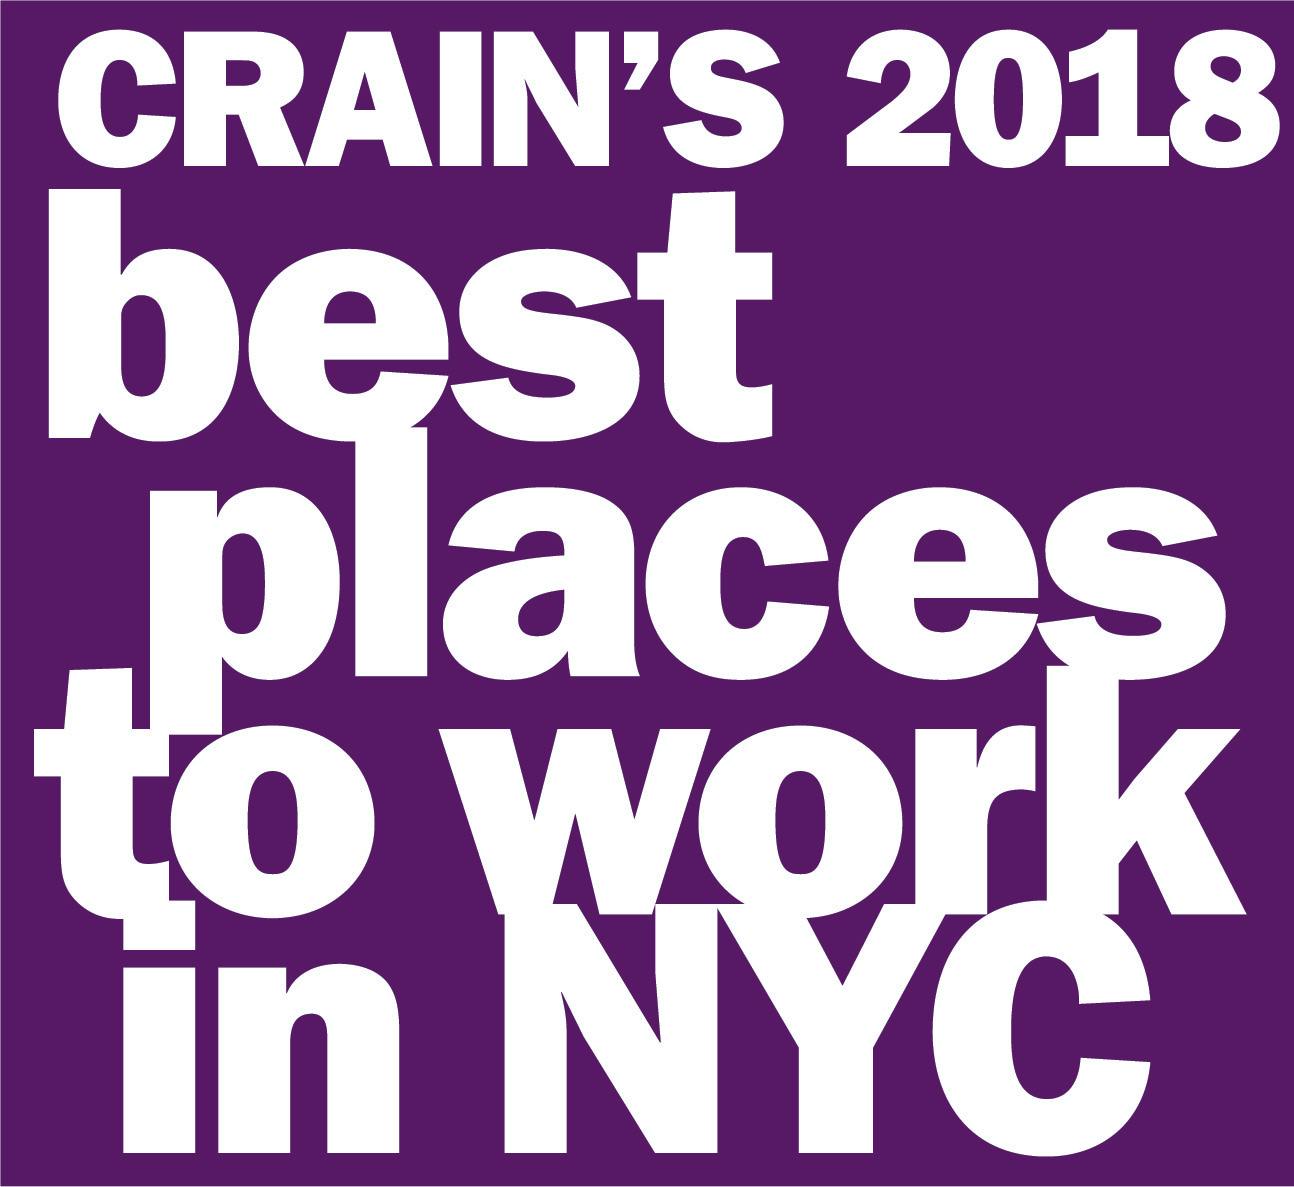 Crain's Best places to work in NYC 2018